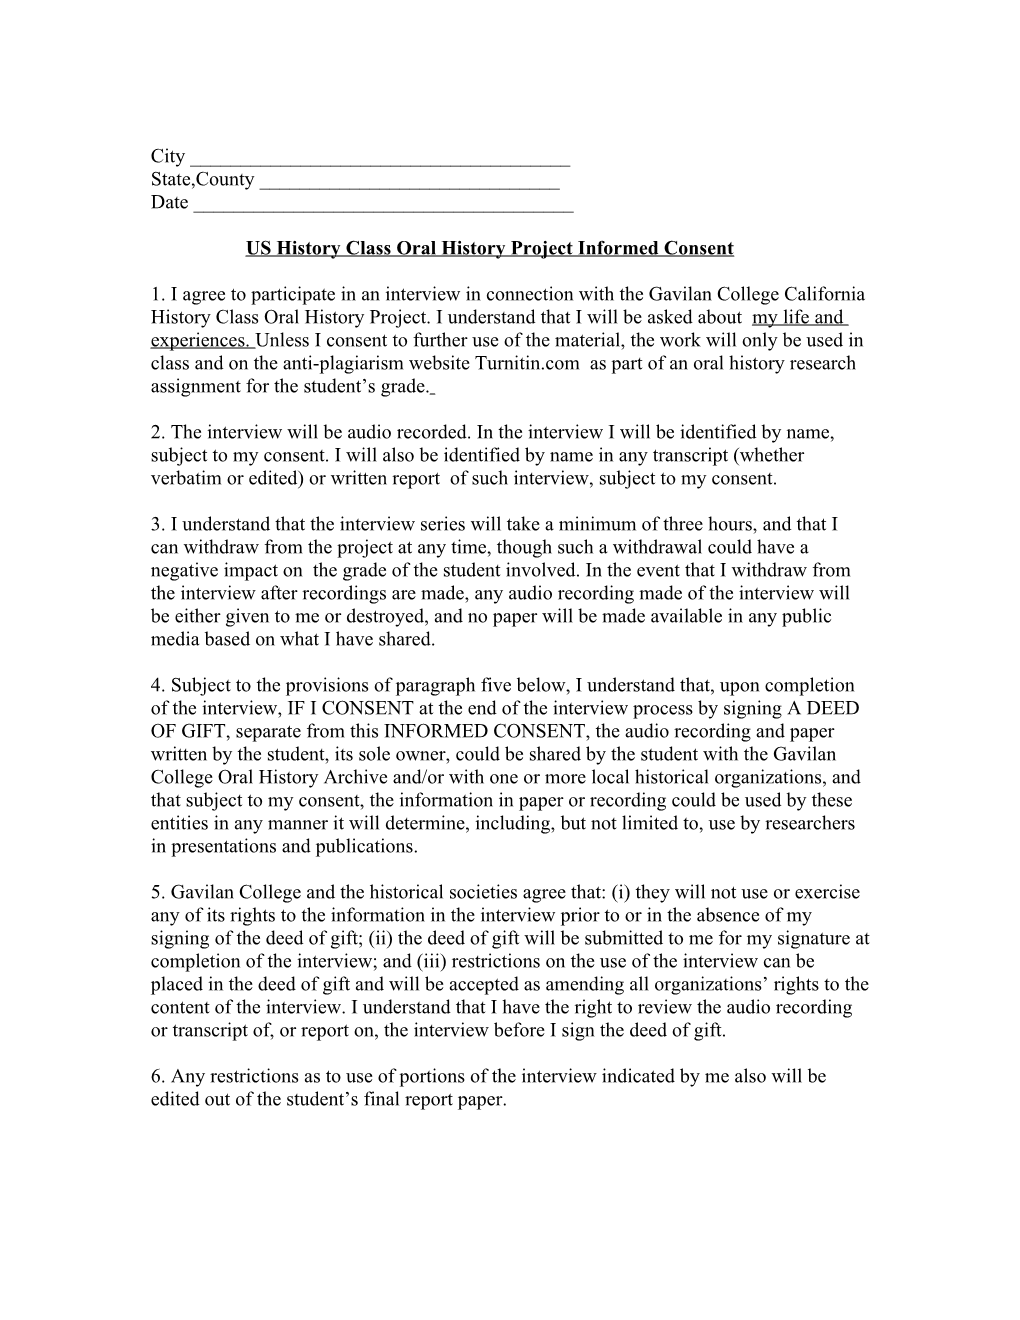 US History Class Oral History Project Informed Consent